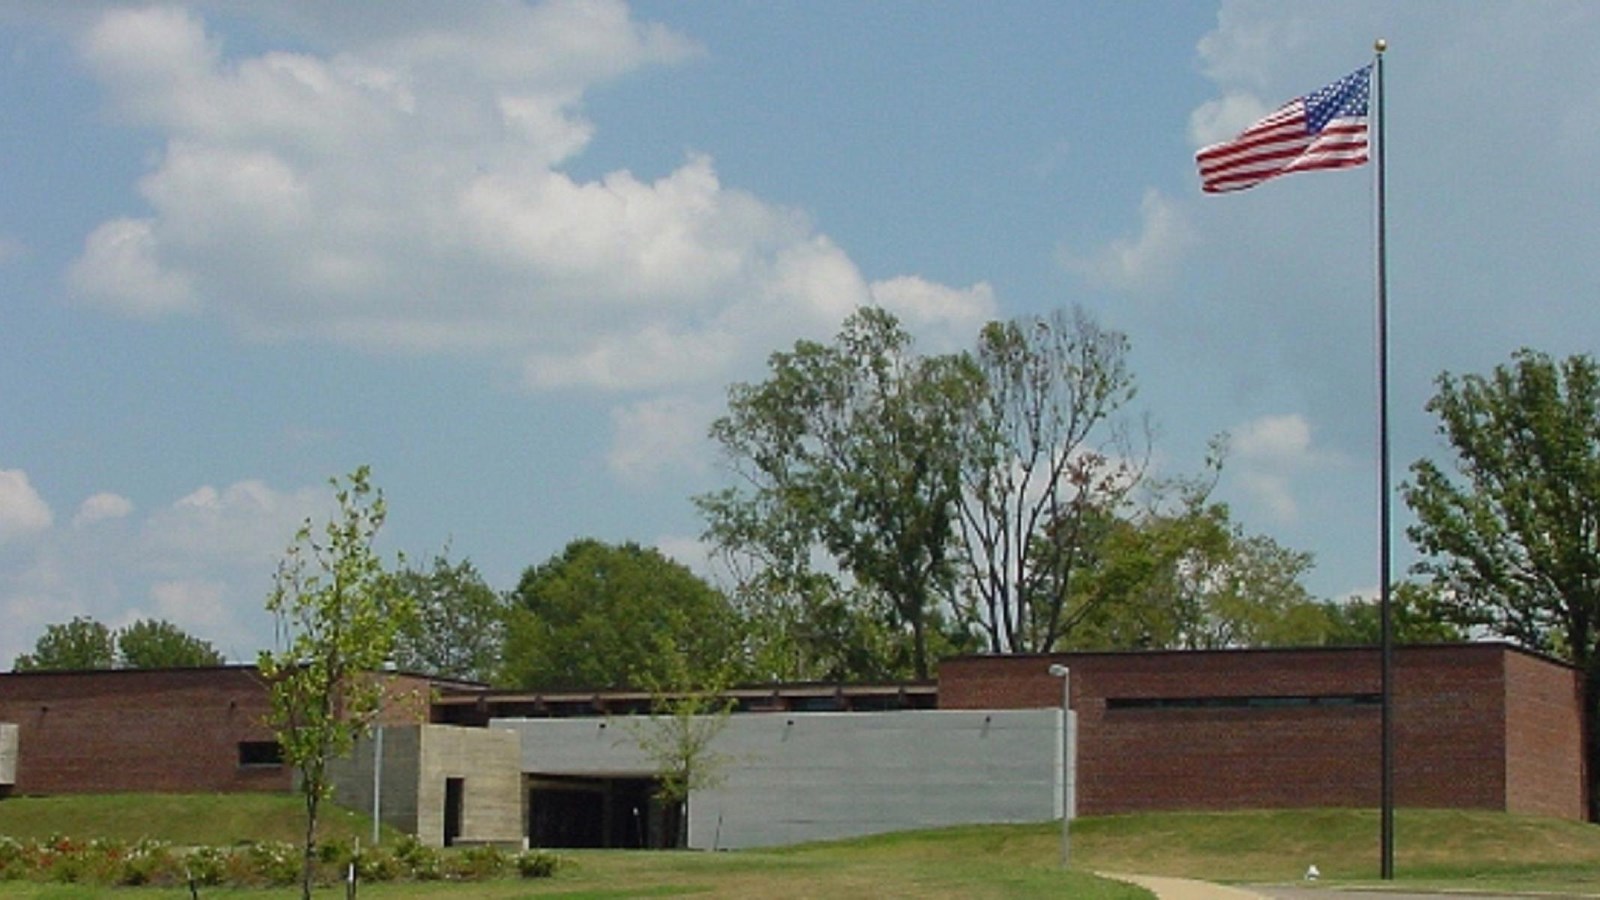 Image of a brick building with American flag flying out front